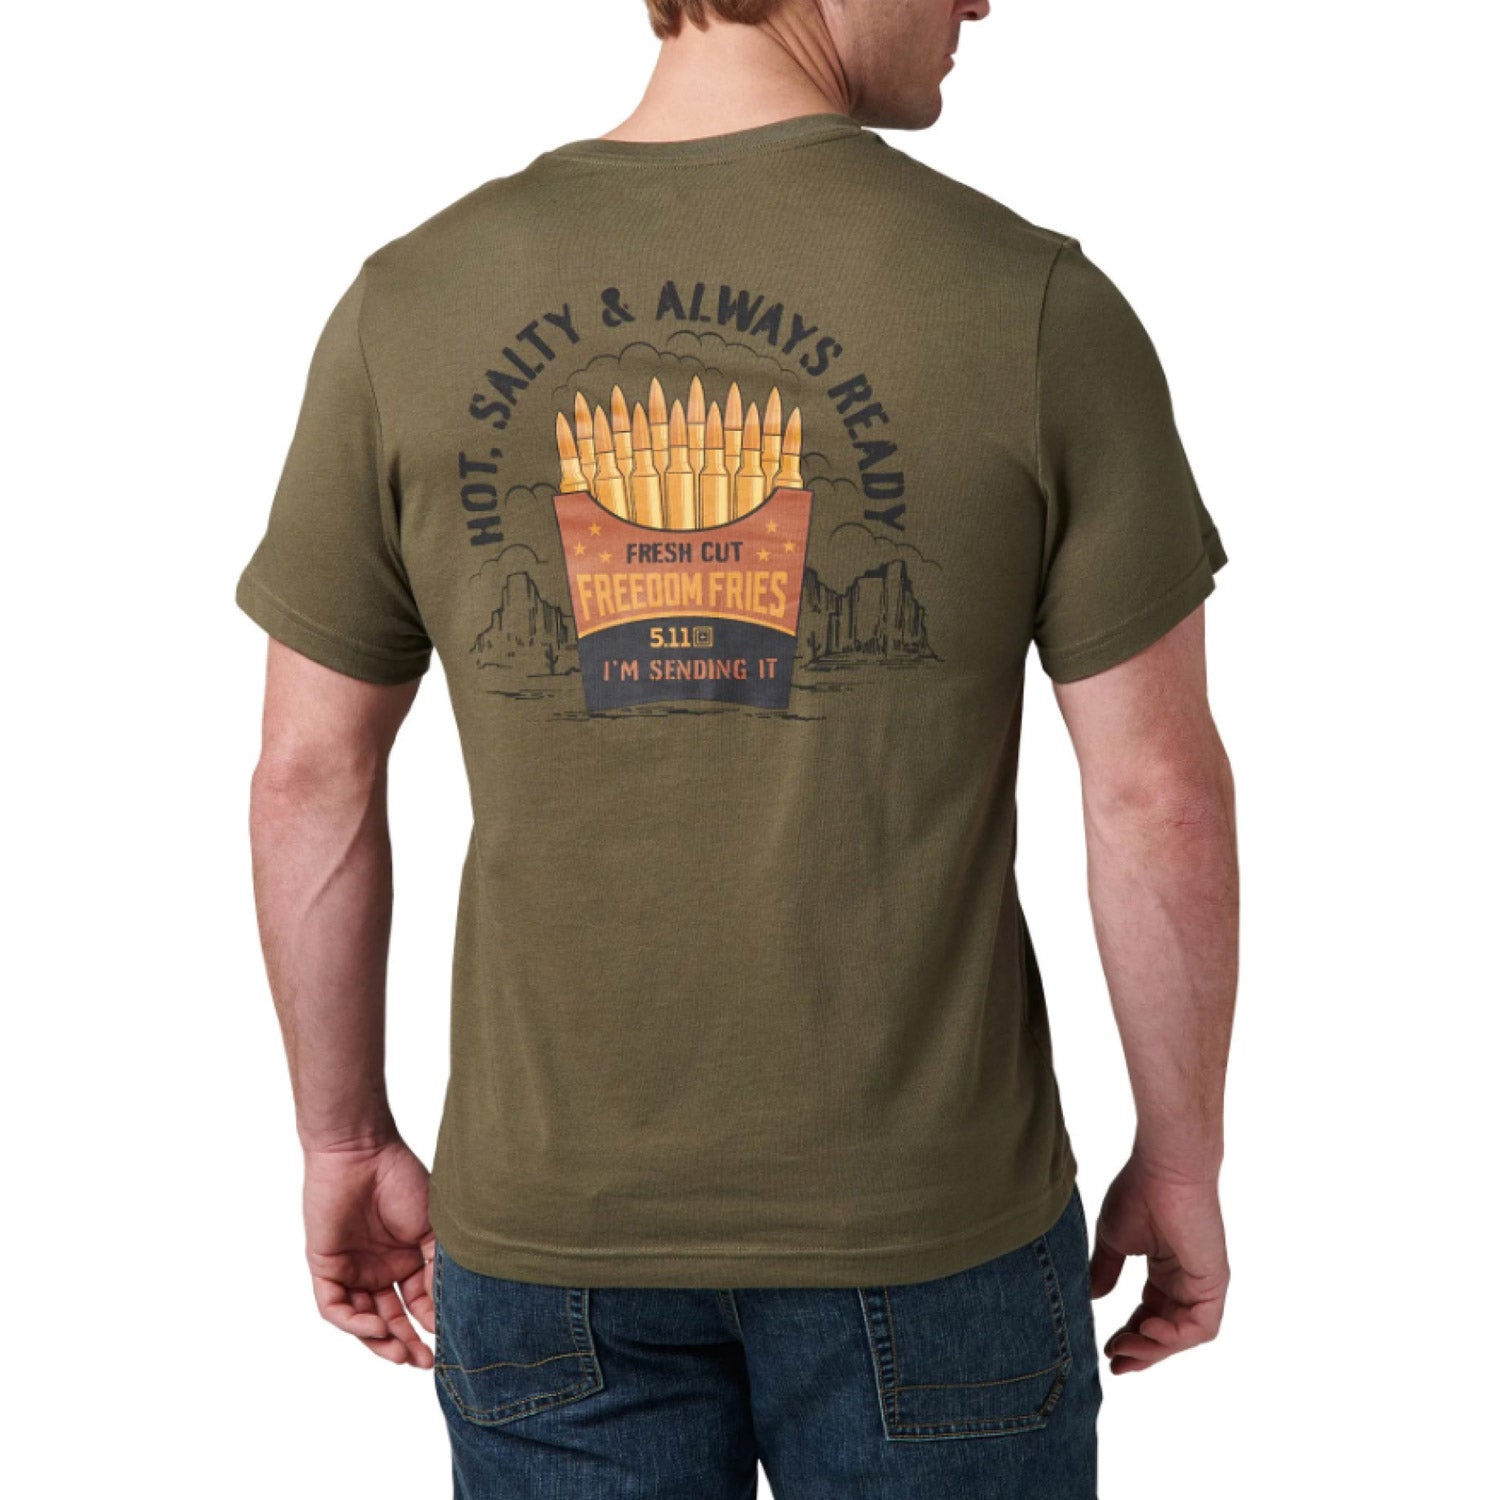 5.11 Tactical Men's Freedom Fries Graphic Short Sleeve T-Shirt - Work World - Workwear, Work Boots, Safety Gear